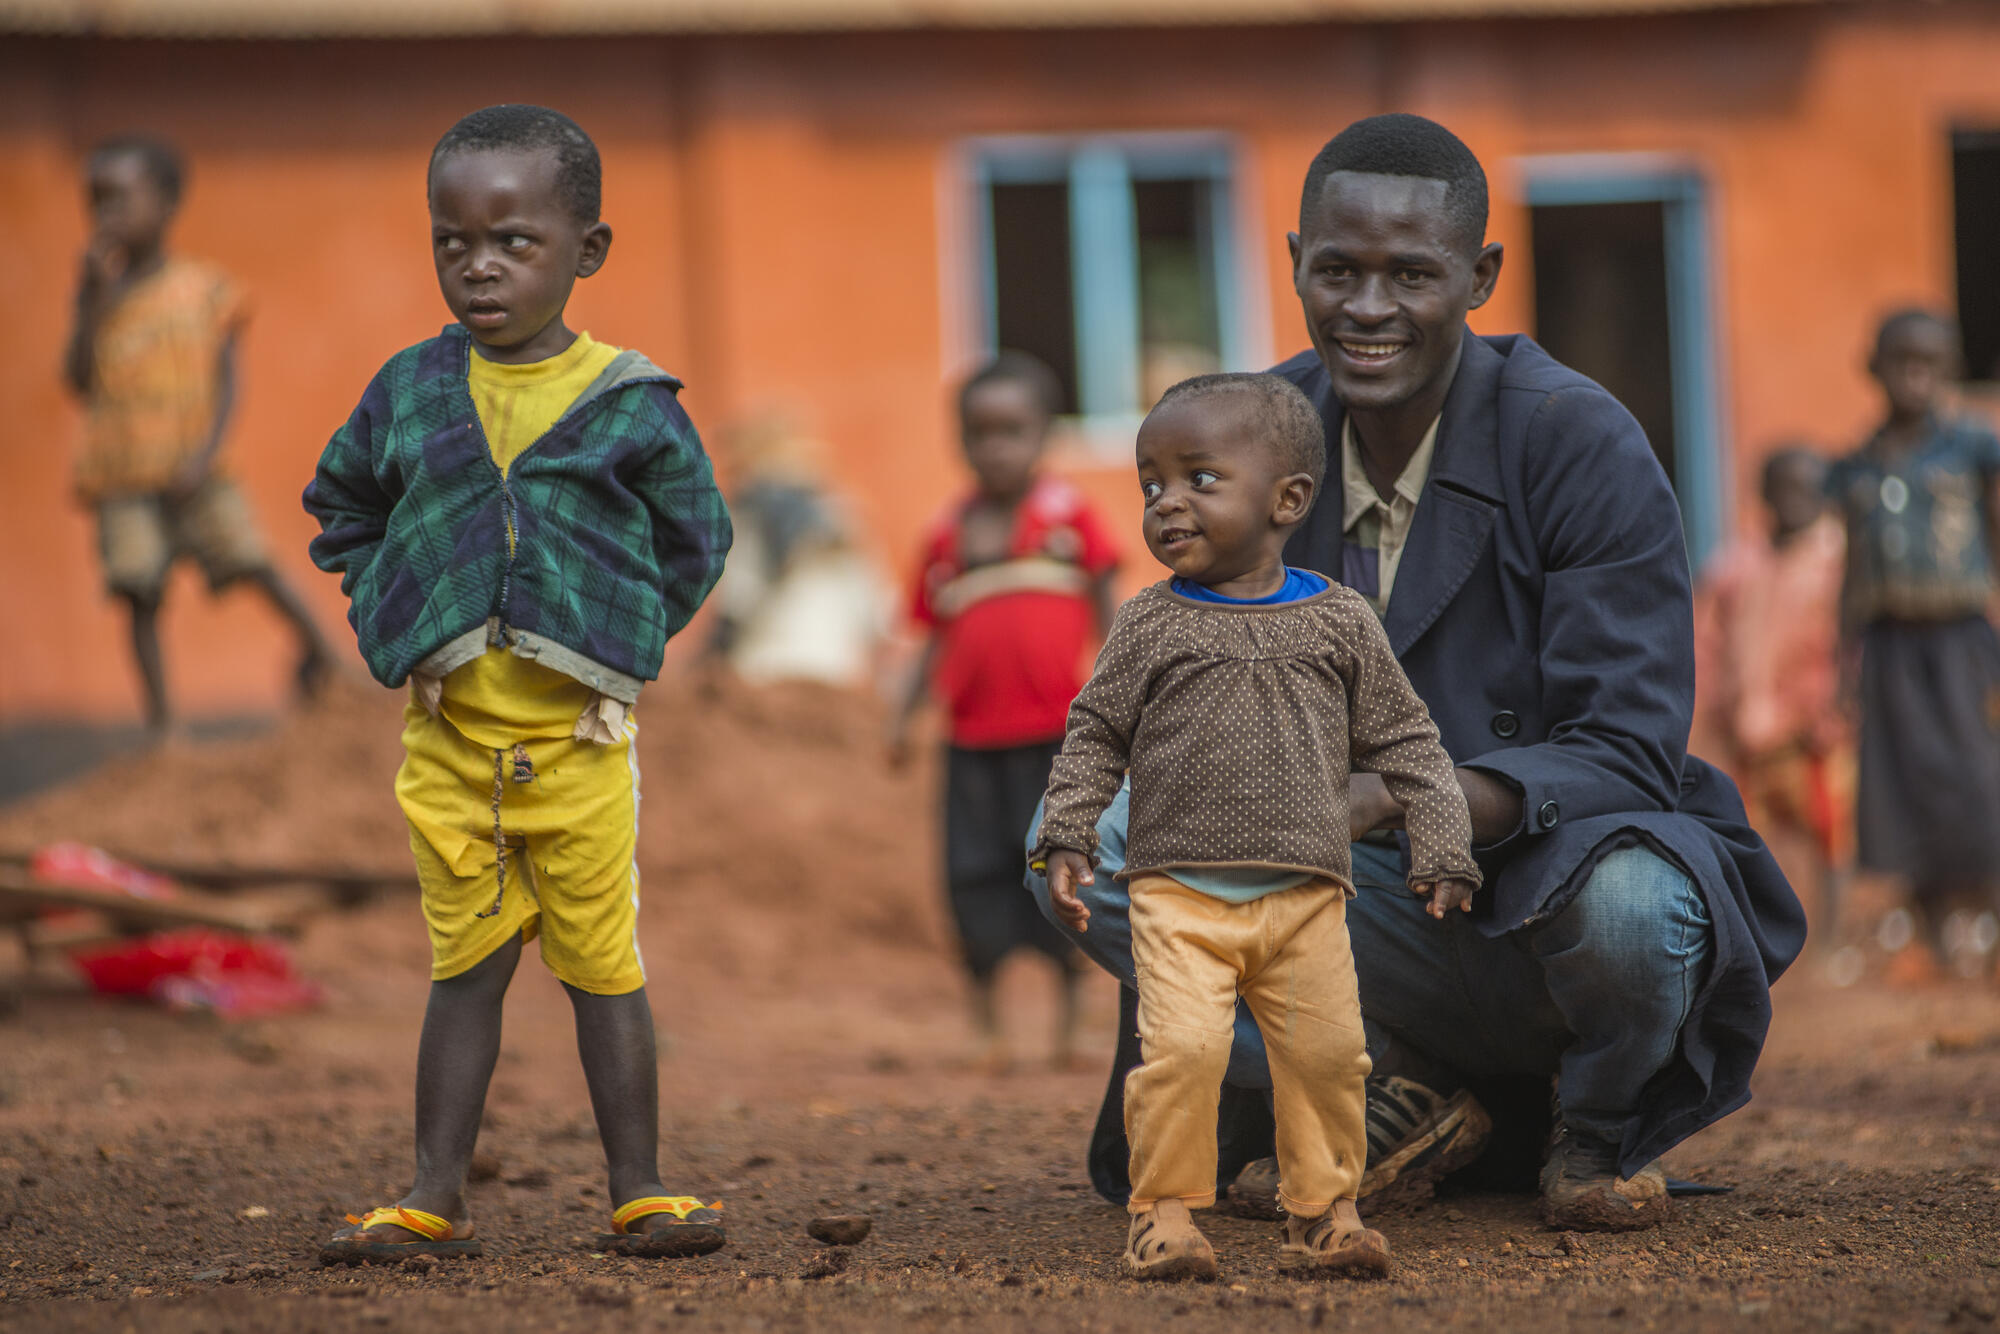 Amisi Sungura Bakari, 26, is a Congolese refugee who lives in Nyarugusu refugee camp along with his young family.